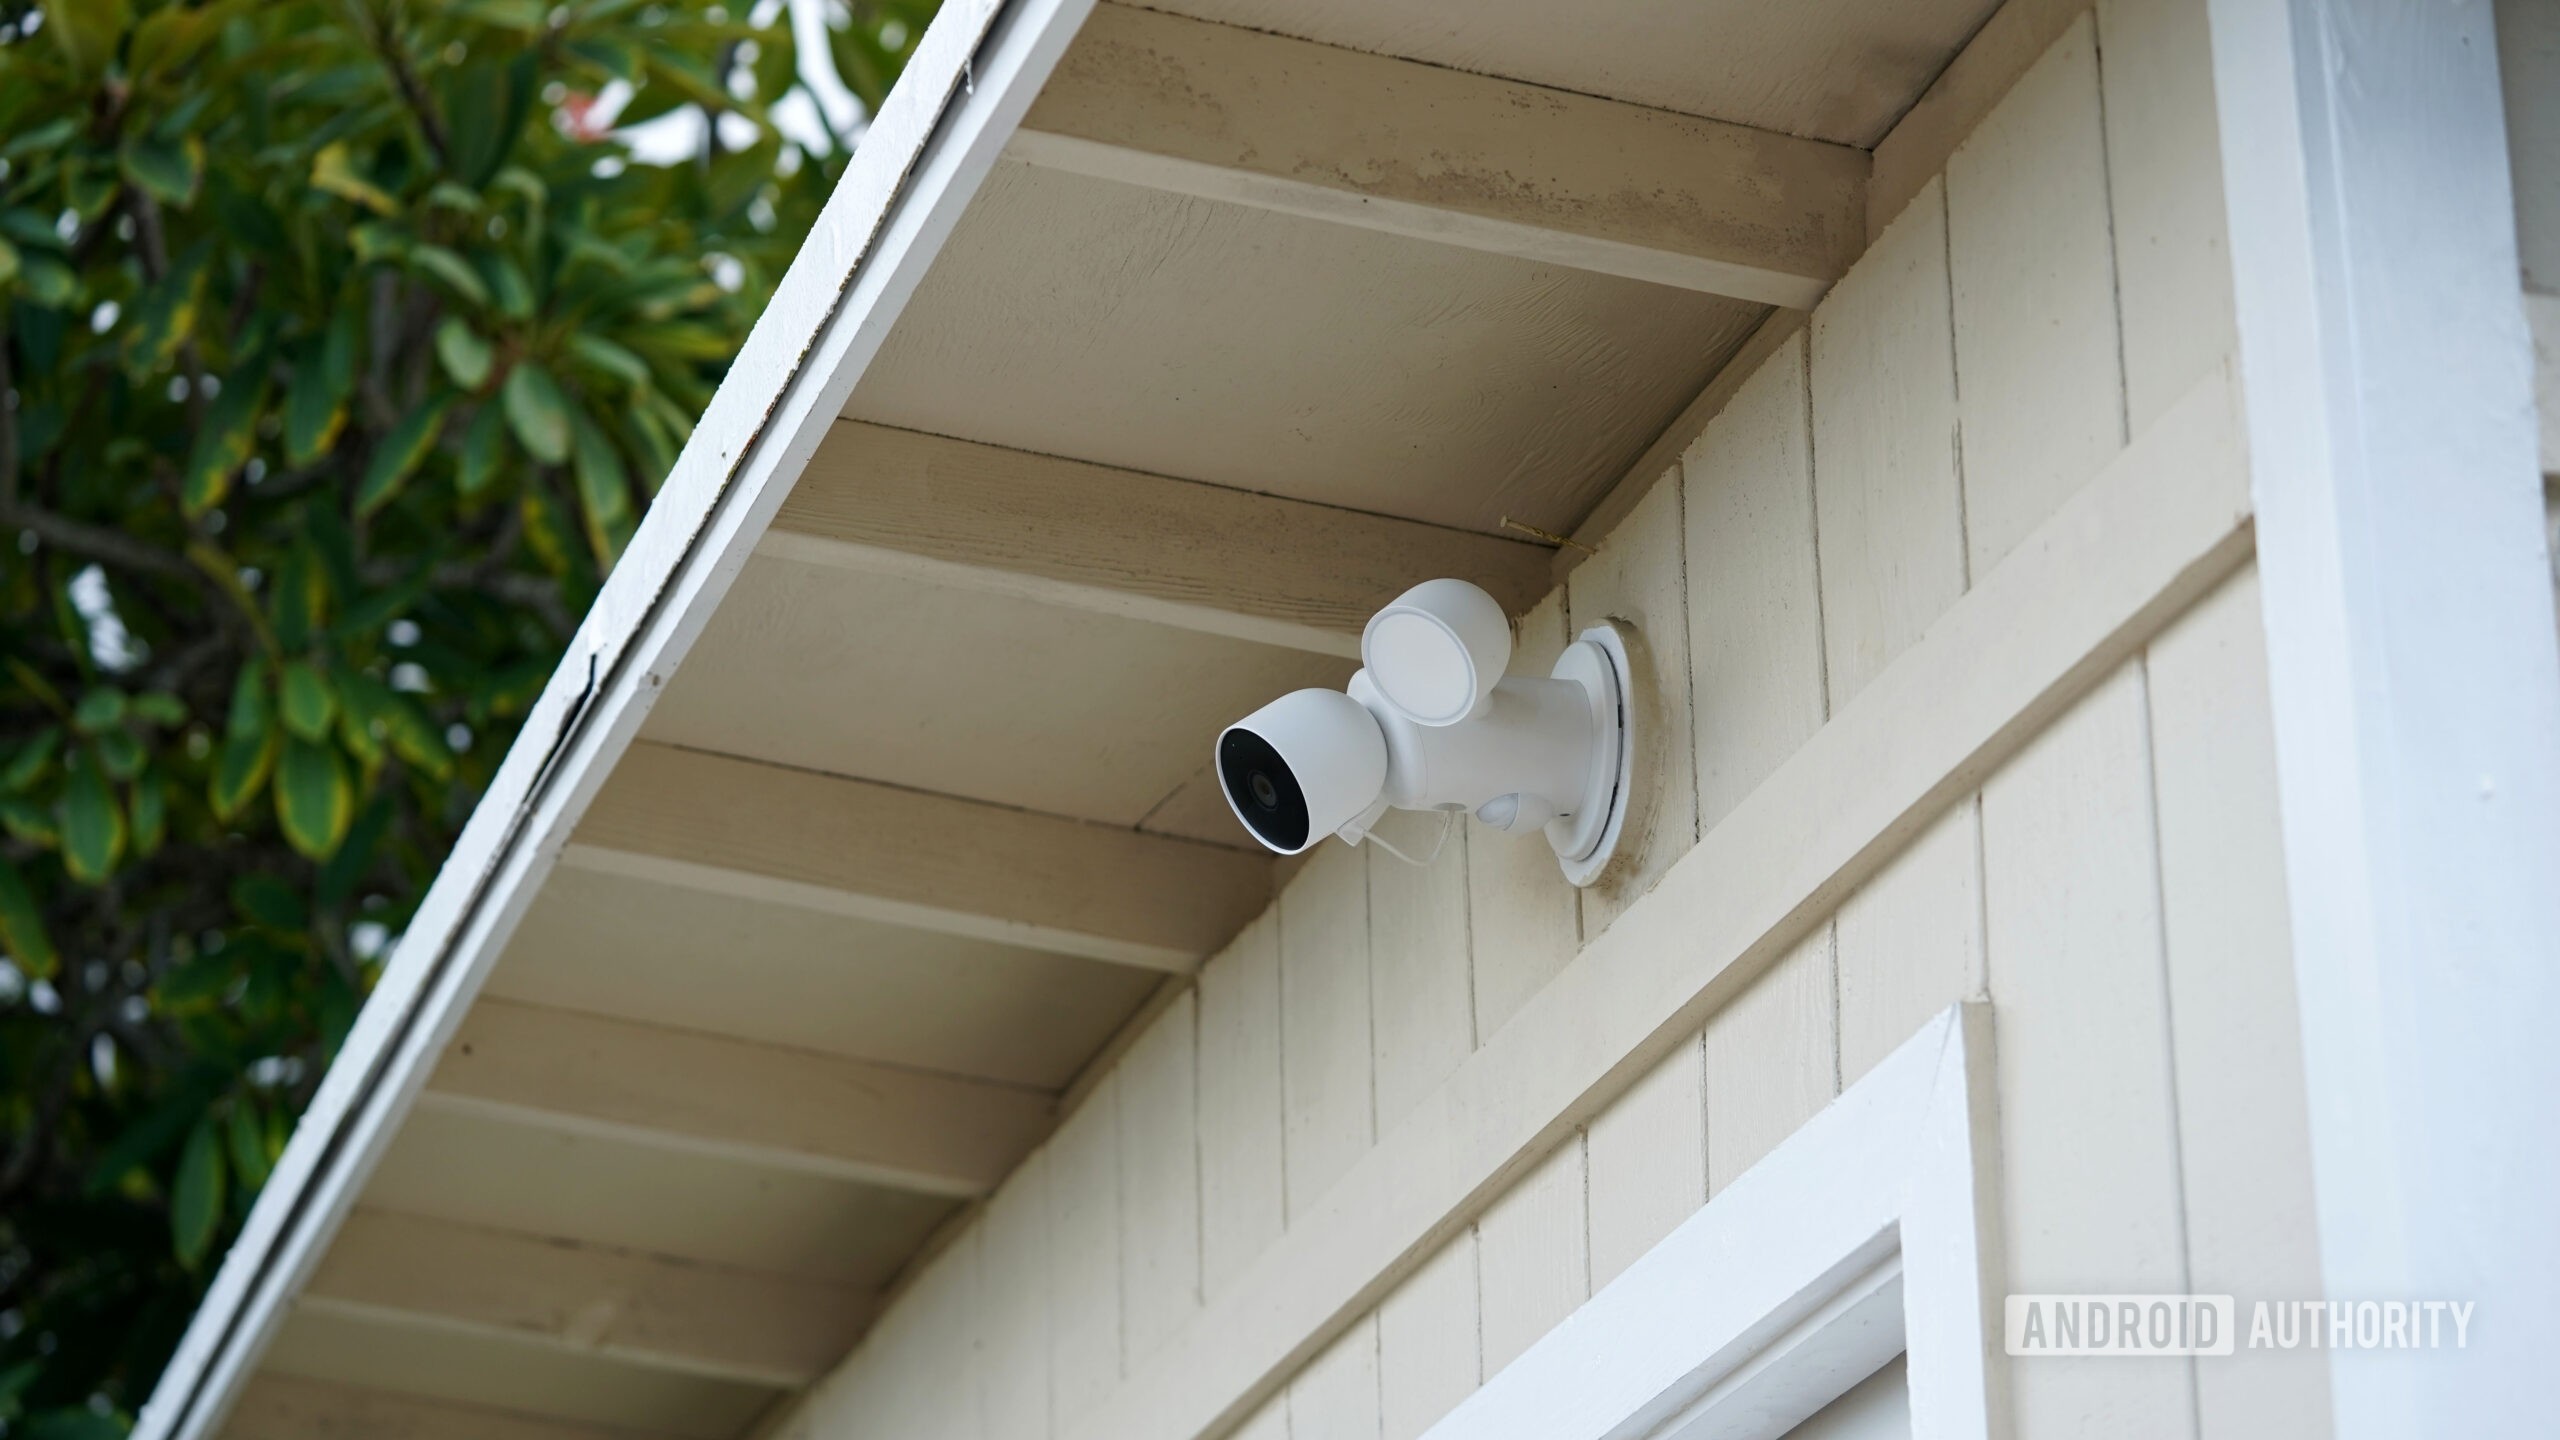 A Google Nest Cam with Floodlight aims at a user's side door.